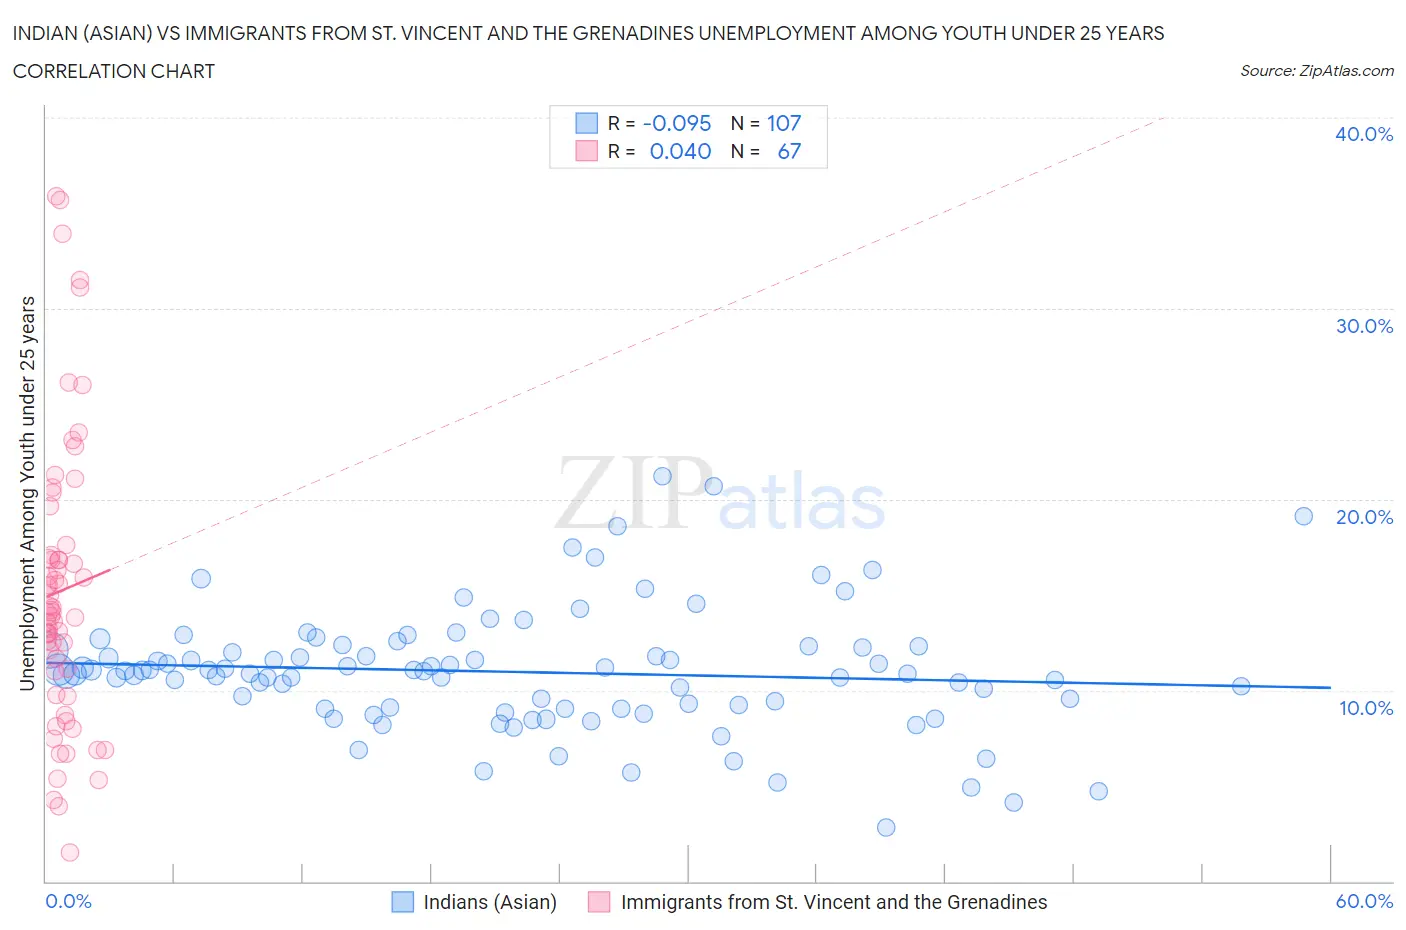 Indian (Asian) vs Immigrants from St. Vincent and the Grenadines Unemployment Among Youth under 25 years